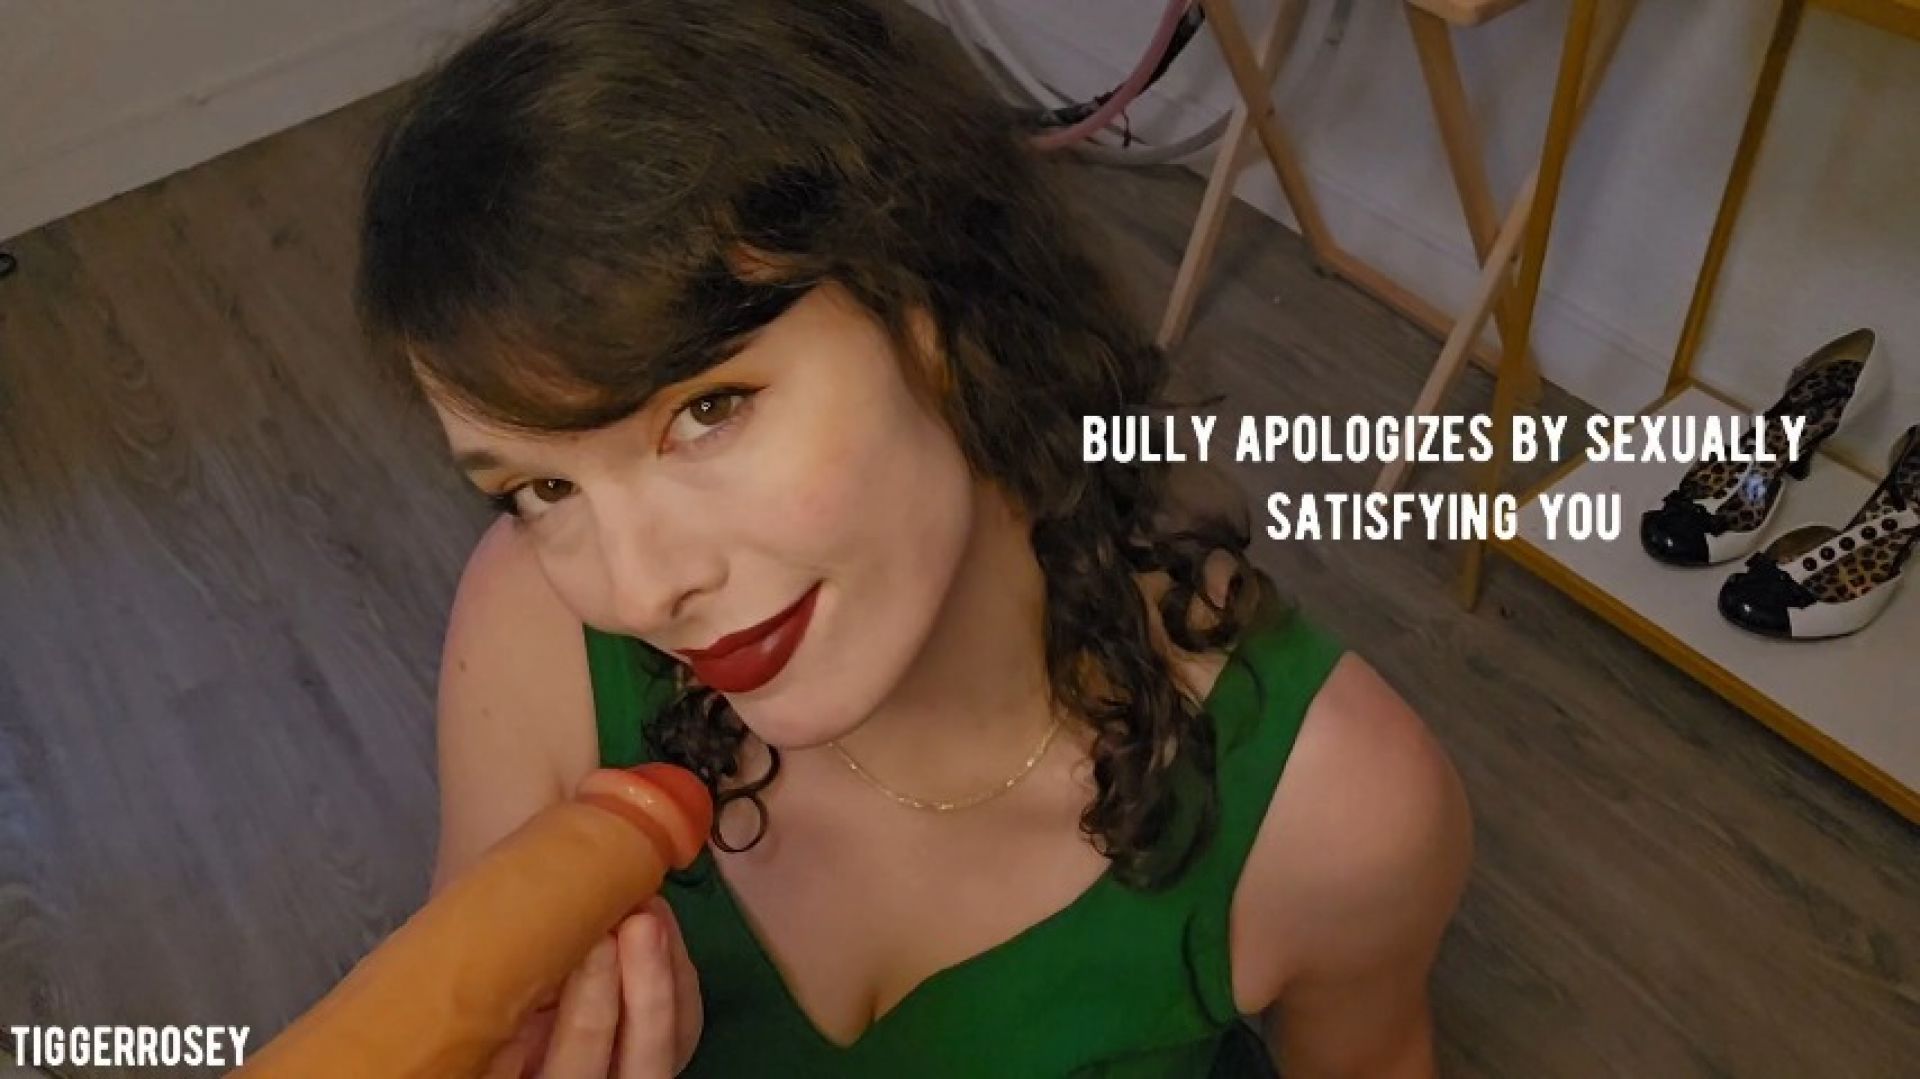 leaked Bully Apologizes by Sexually Satisfying You video thumbnail